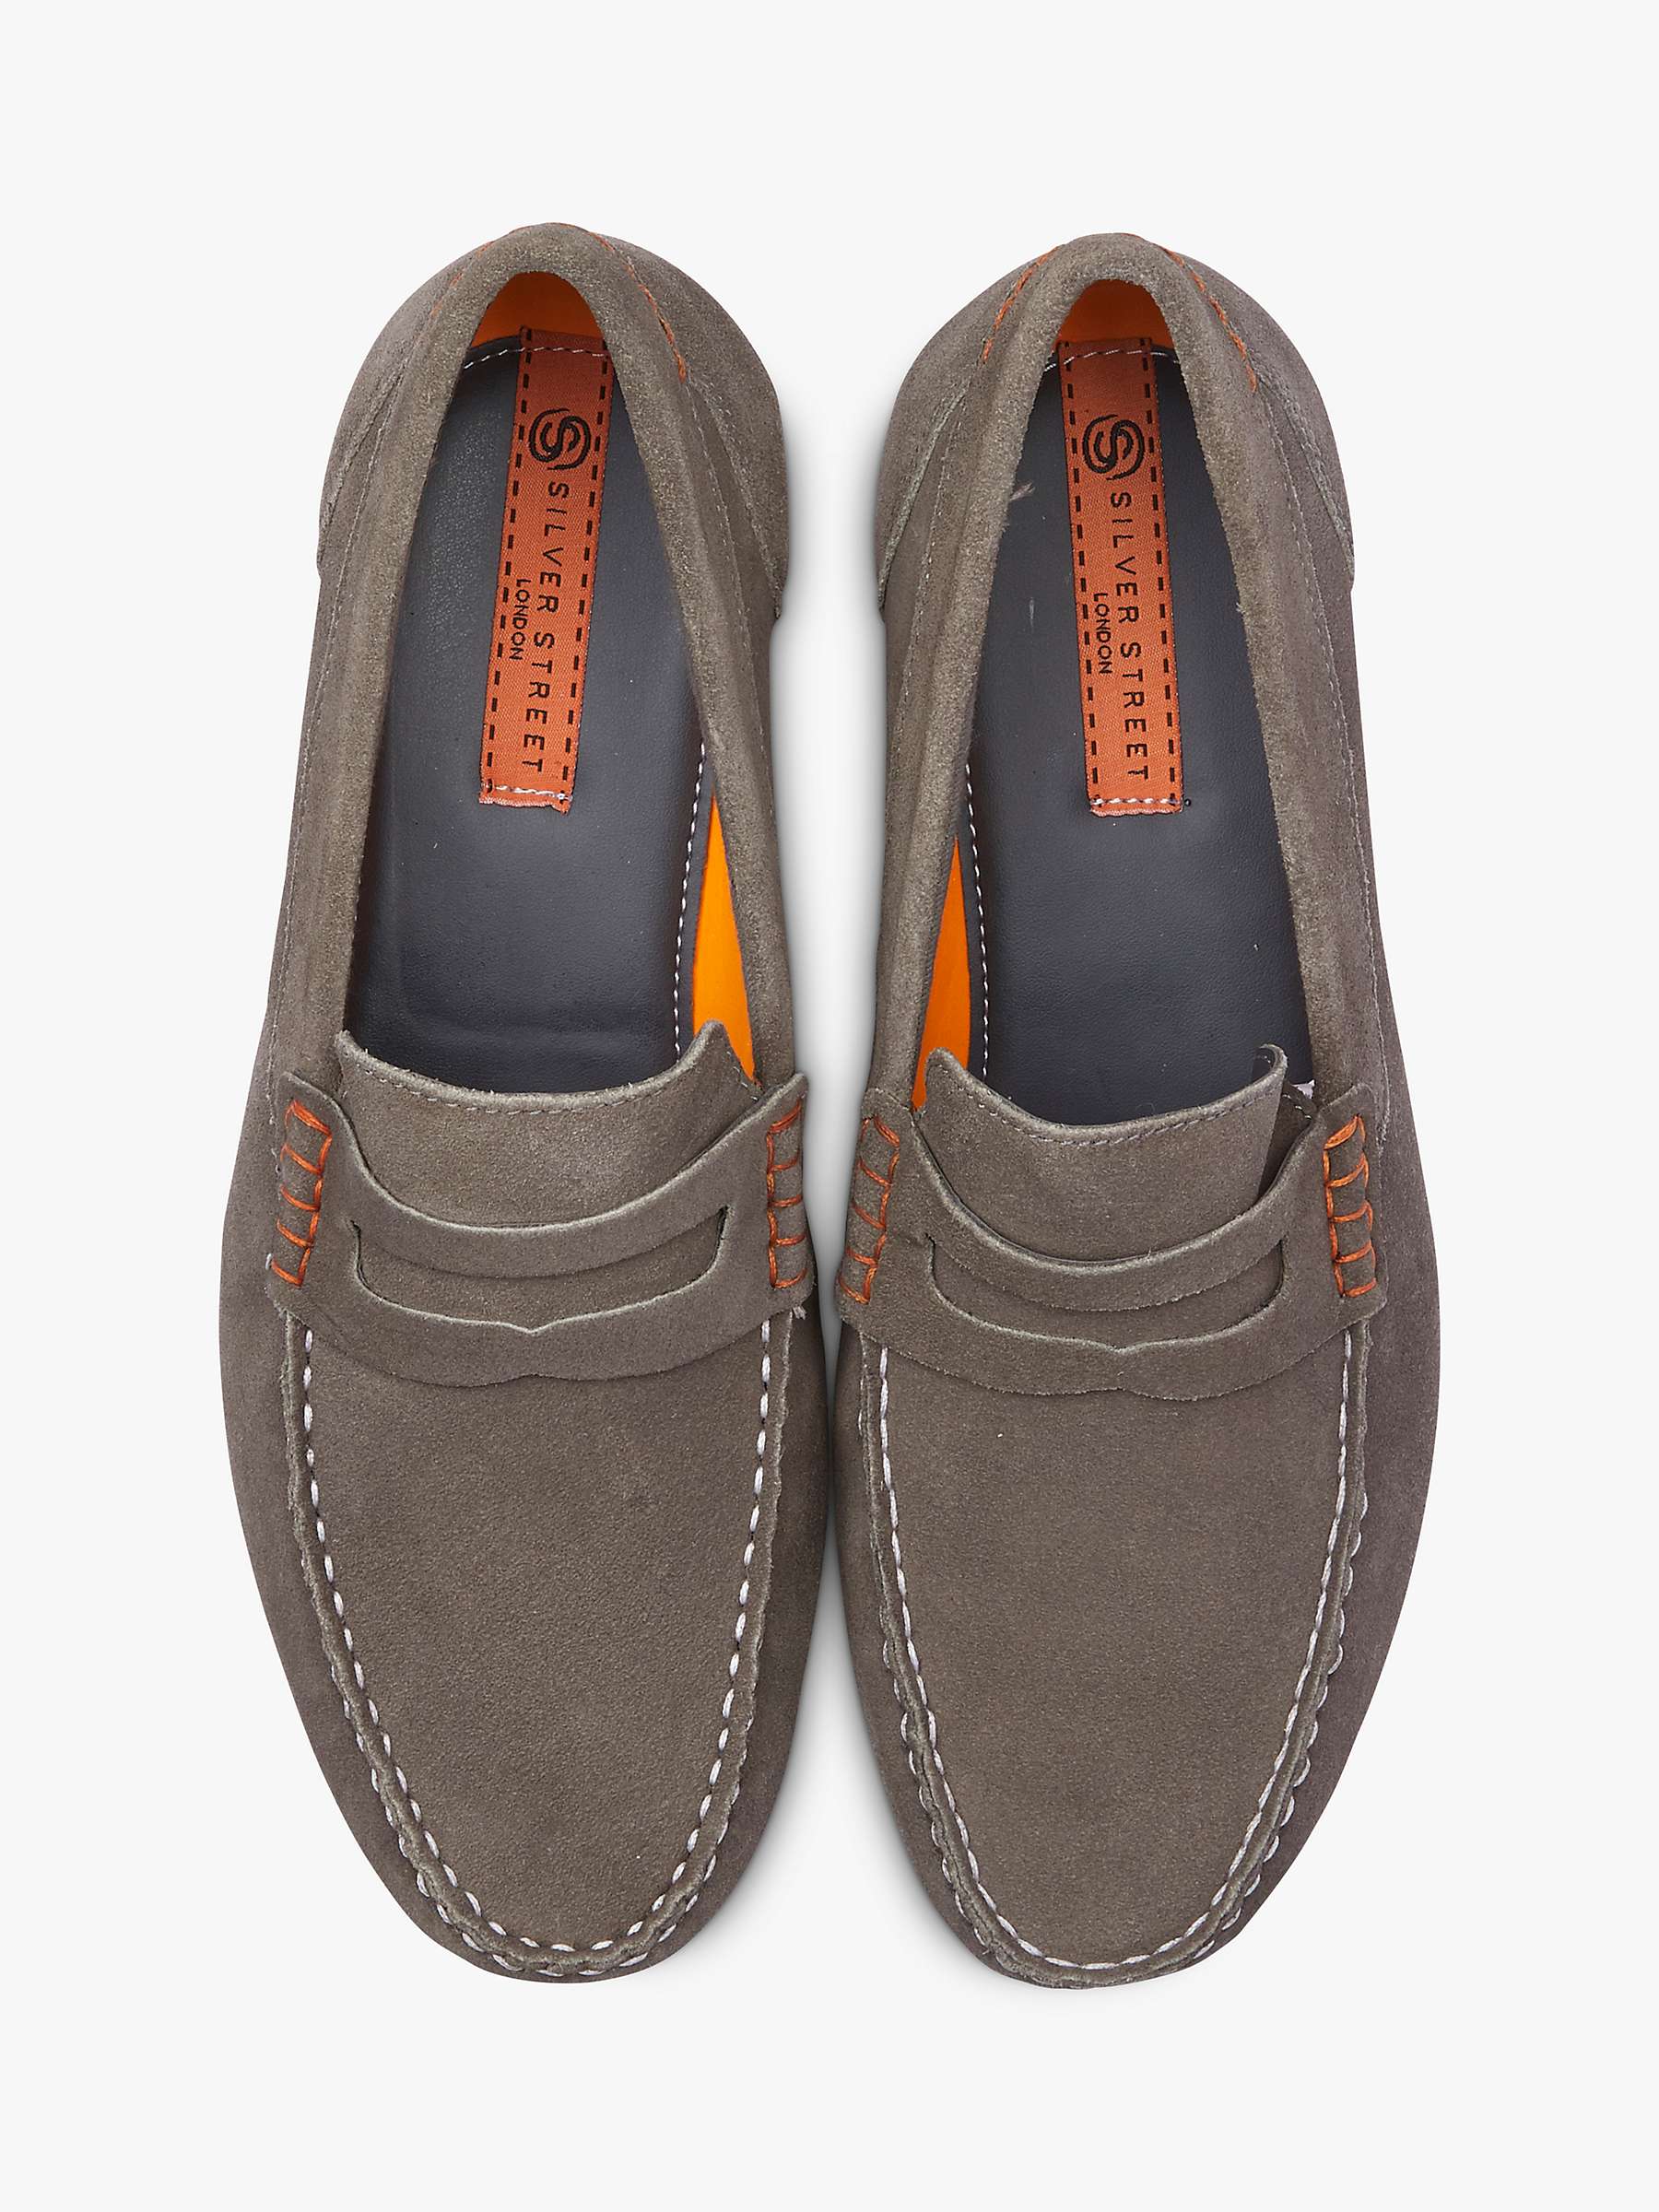 Buy Silver Street London Stanhope Suede Loafers Online at johnlewis.com